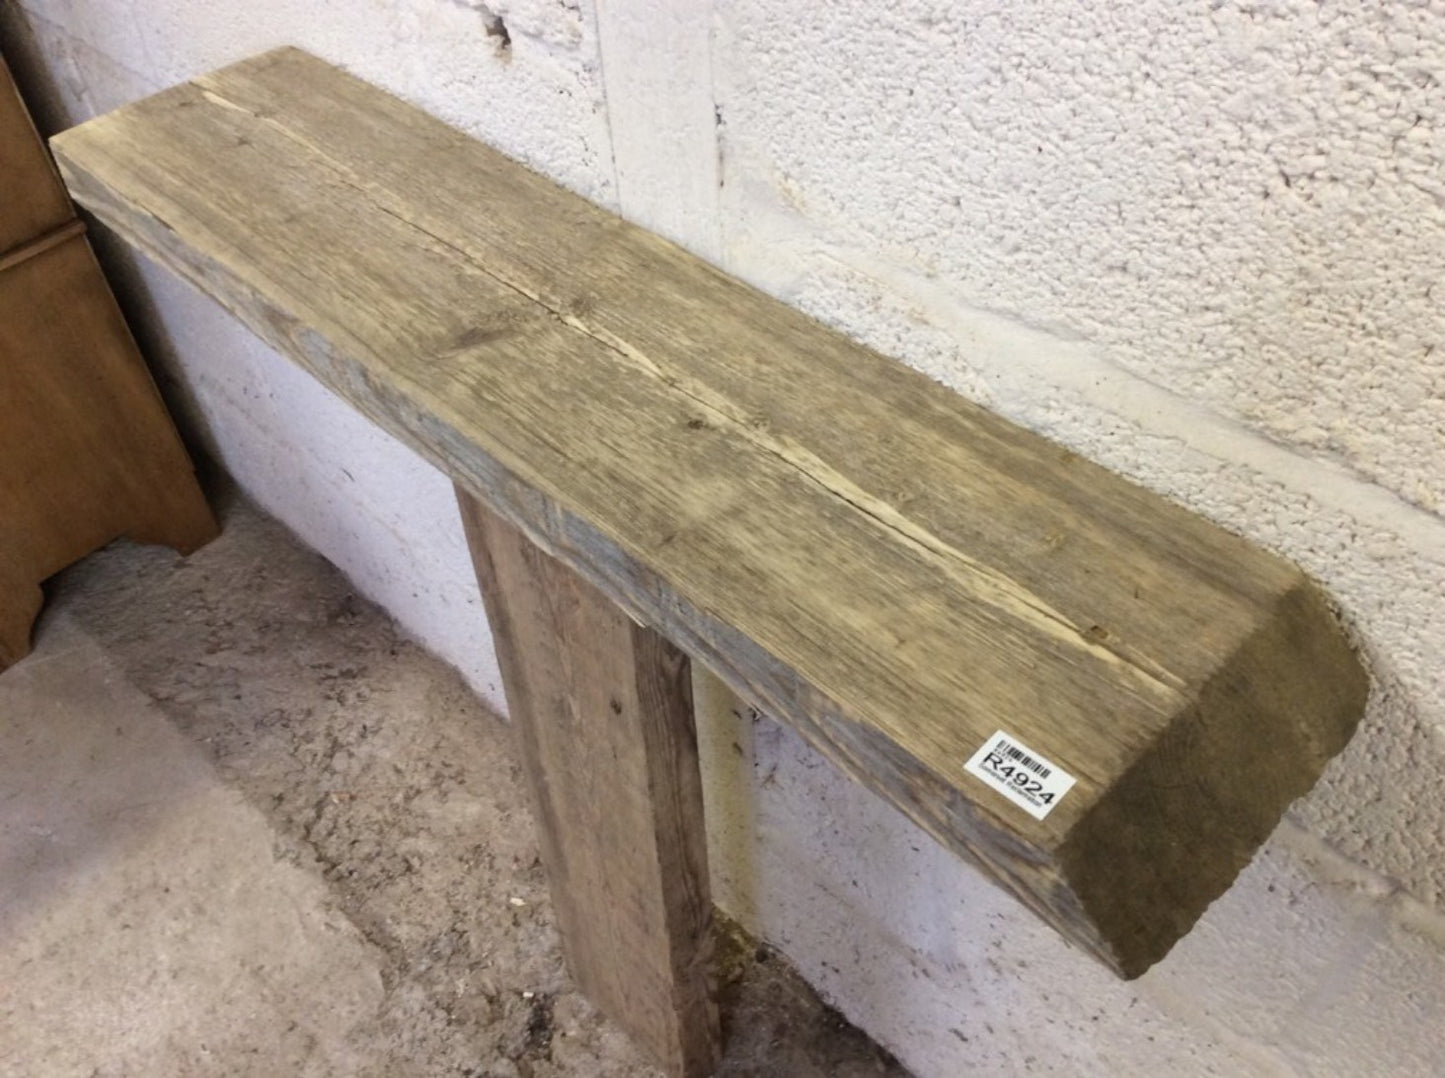 2ft 10 1/8" Or 86.7cm Long Reclaimed Old Rustic Pine Silvered Mantel Shelf